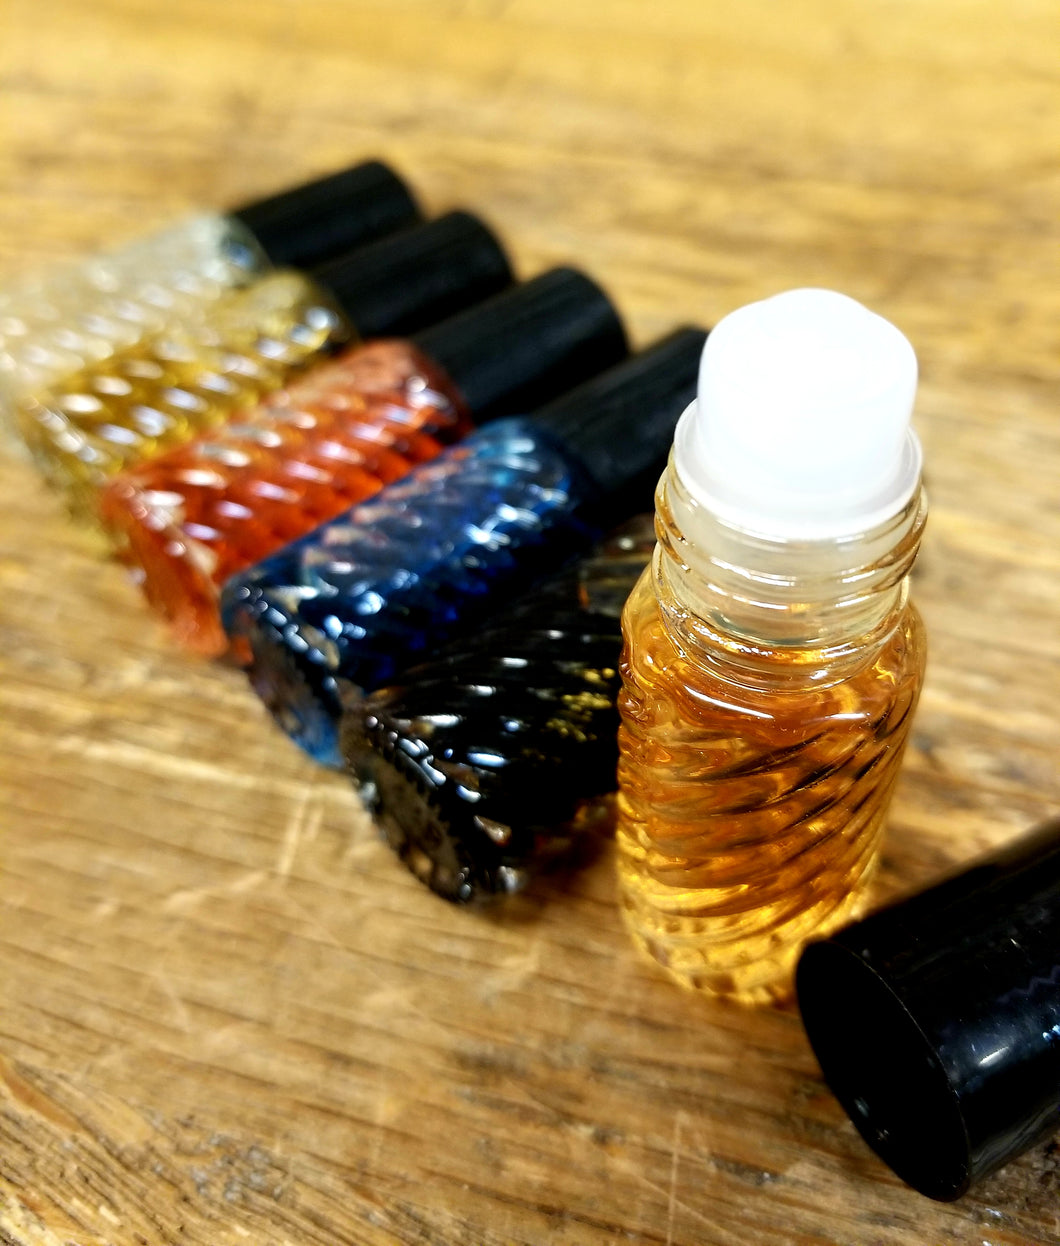 House blend perfume oils from Madina